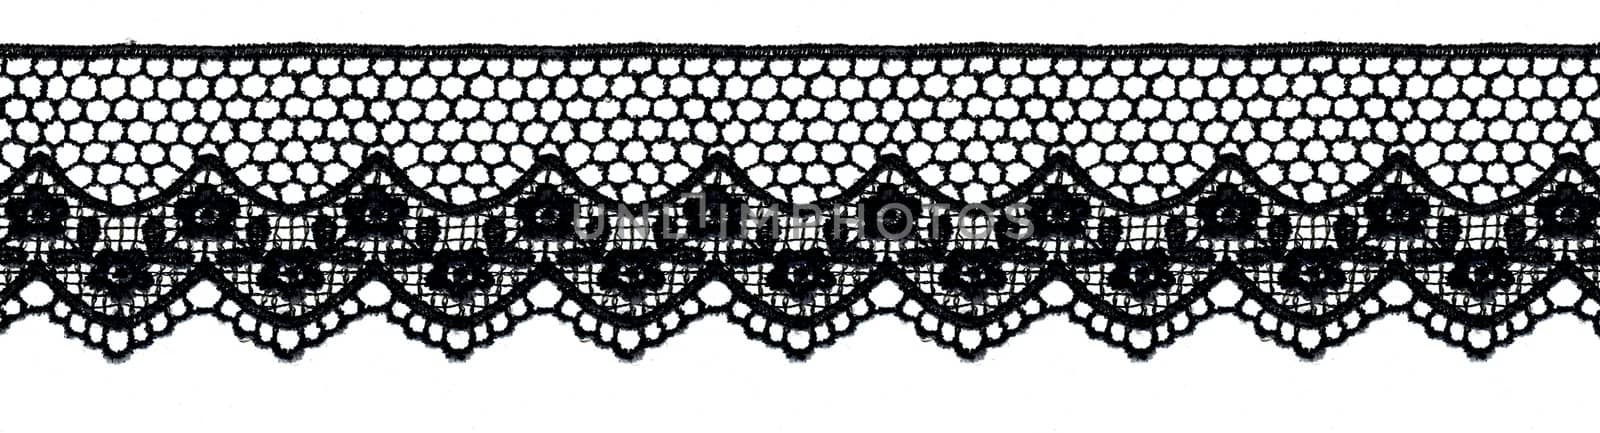 Black lace band isolated over a white background